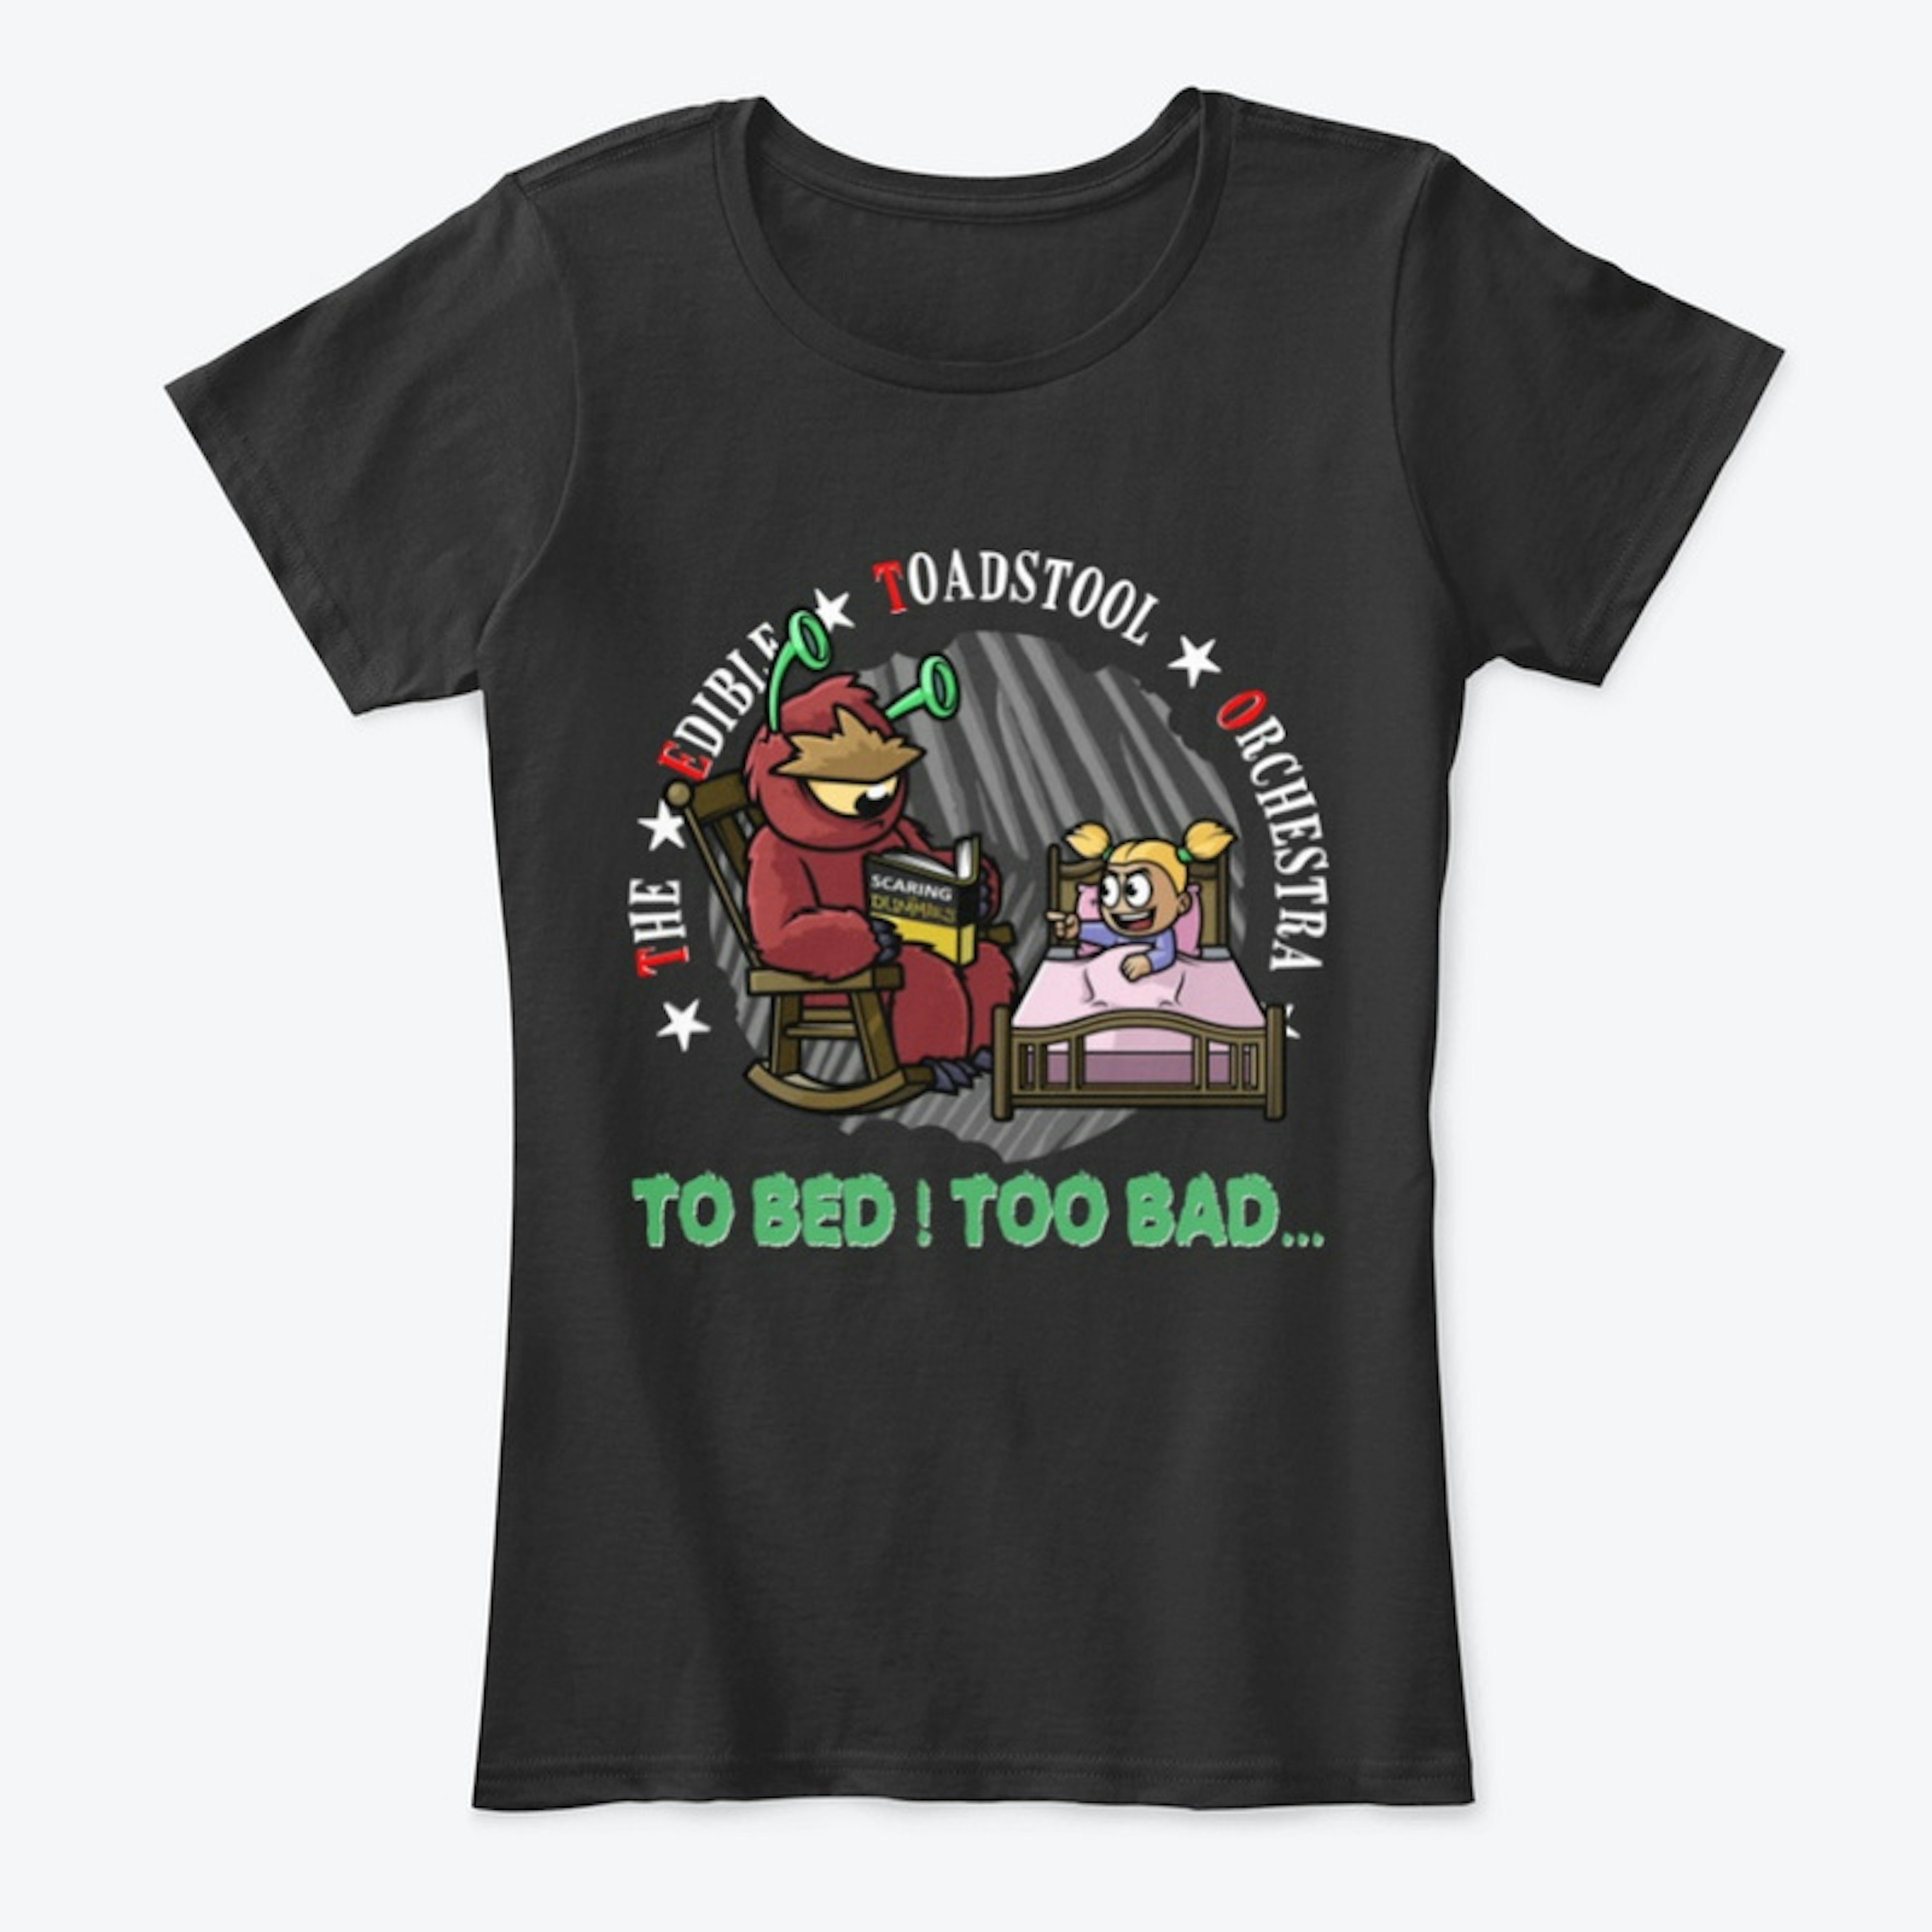 TO BED ! TOO BAD... - Woman Shirt